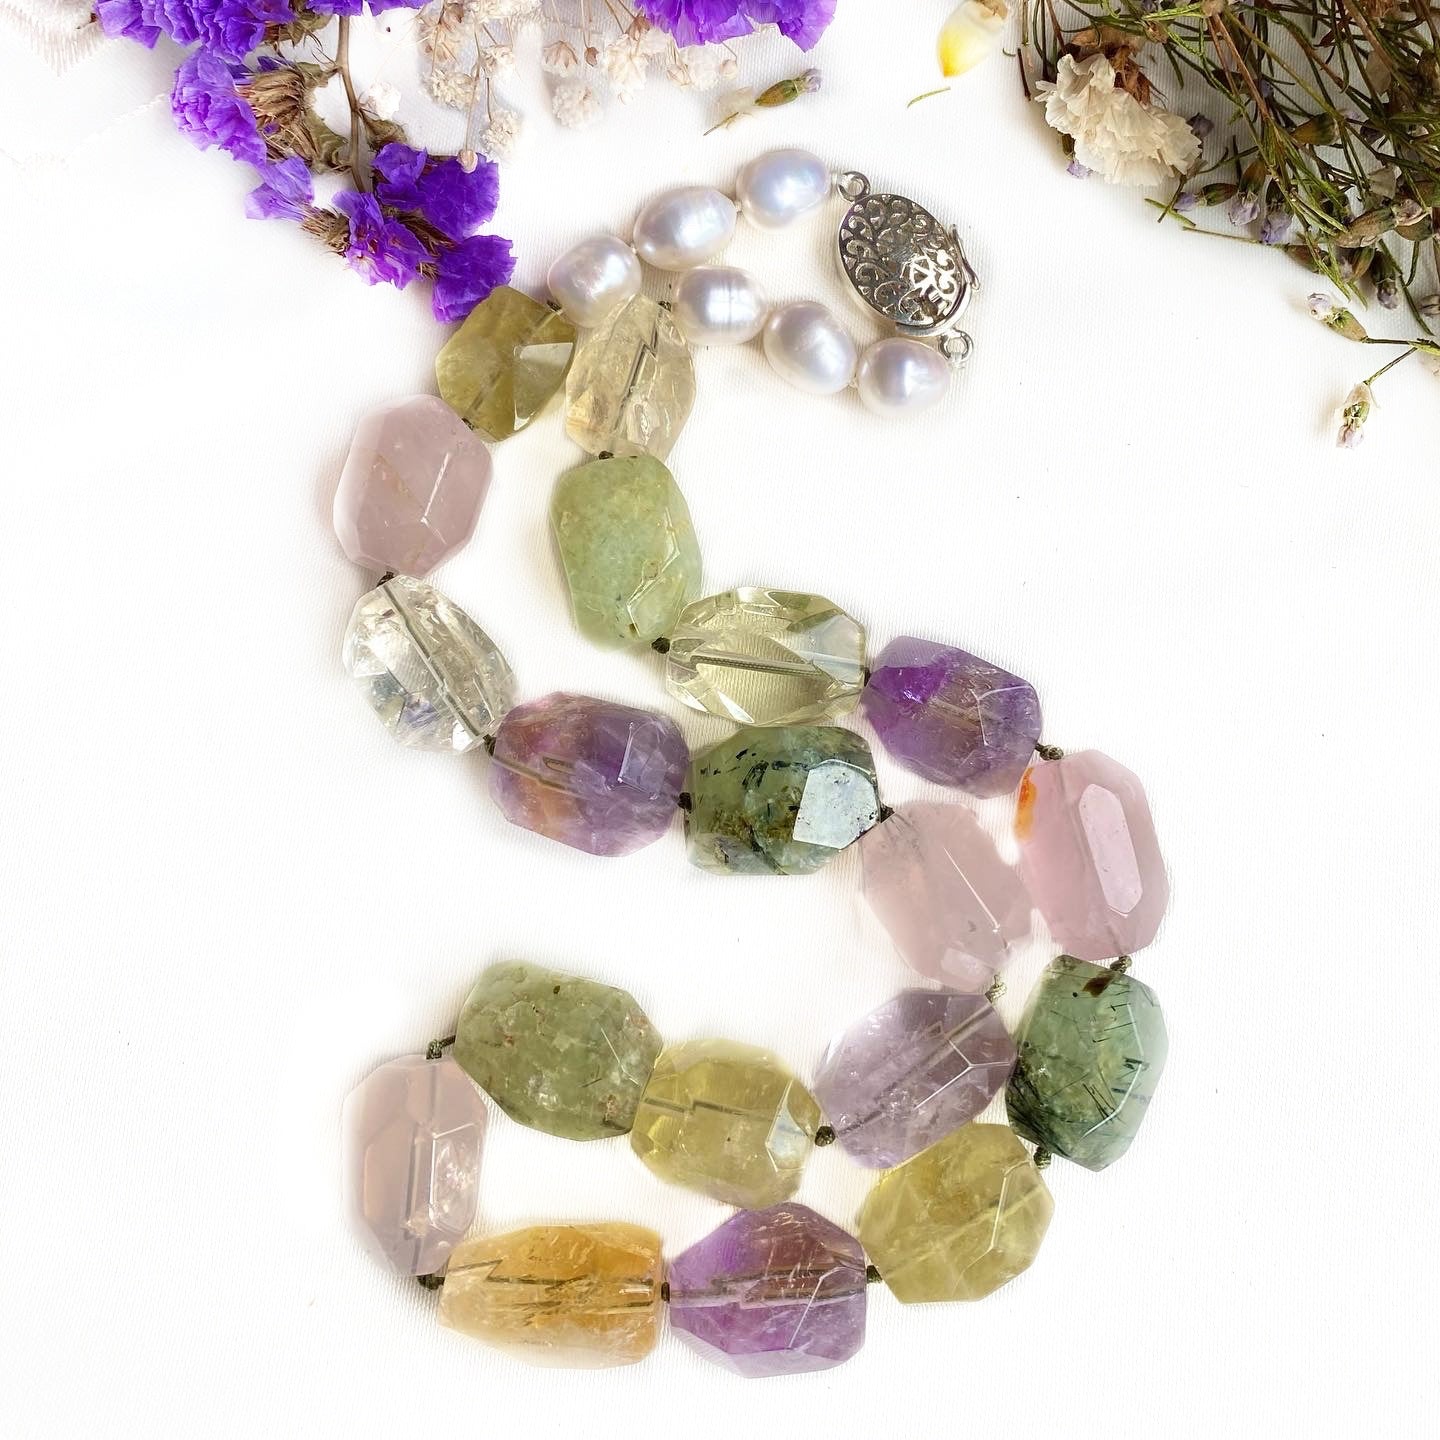 NEW - Multi-gemstone necklace with pearls